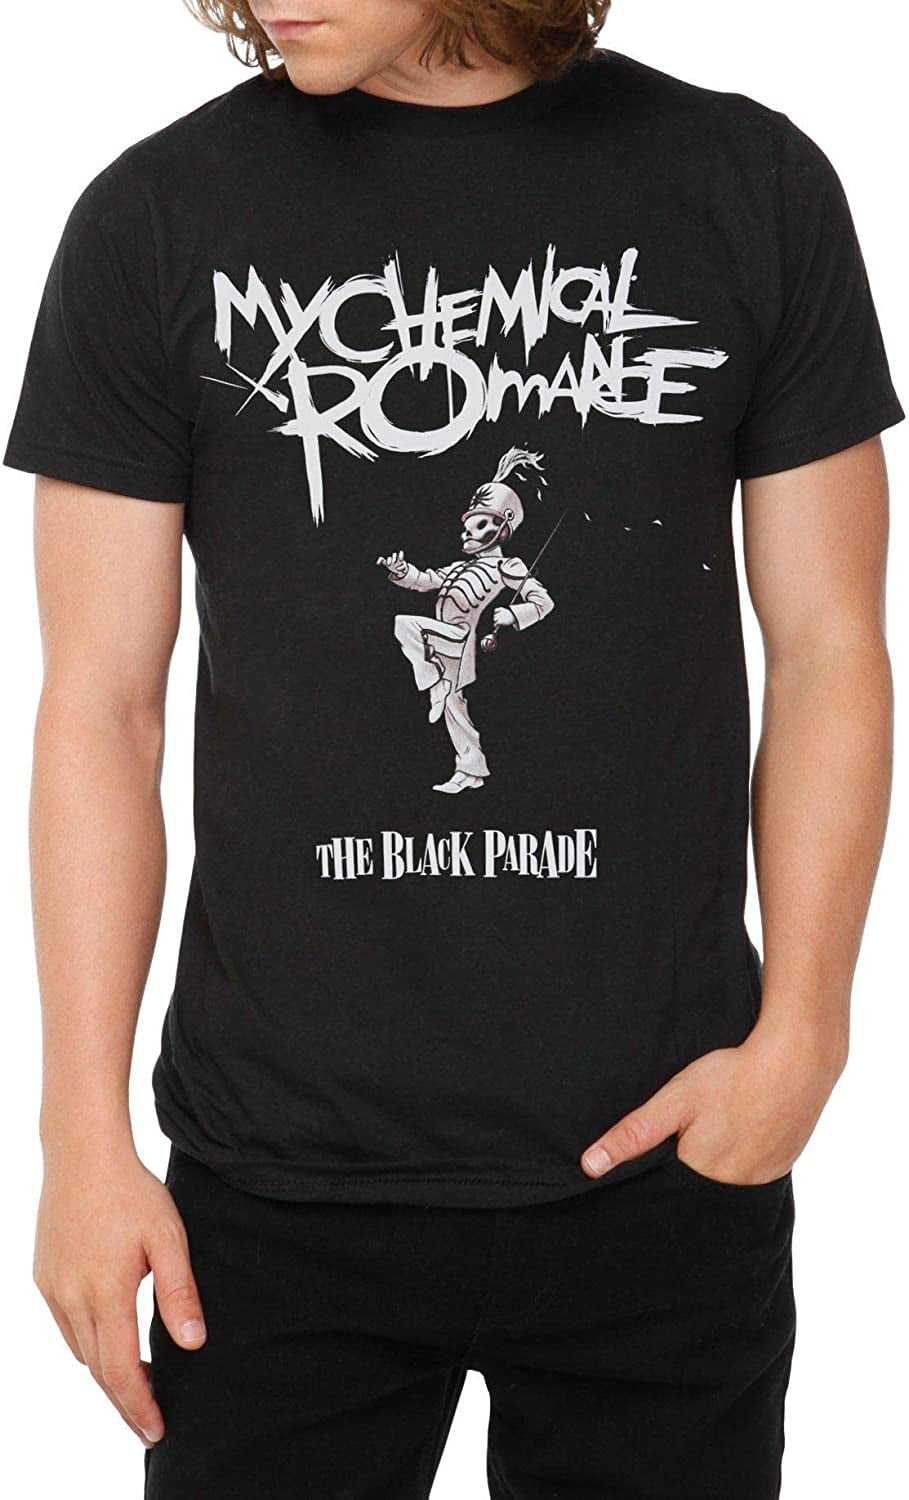 yarn See through Without Hot Topic My Chemical Romance Black Parade T-Shirt - Walmart.com